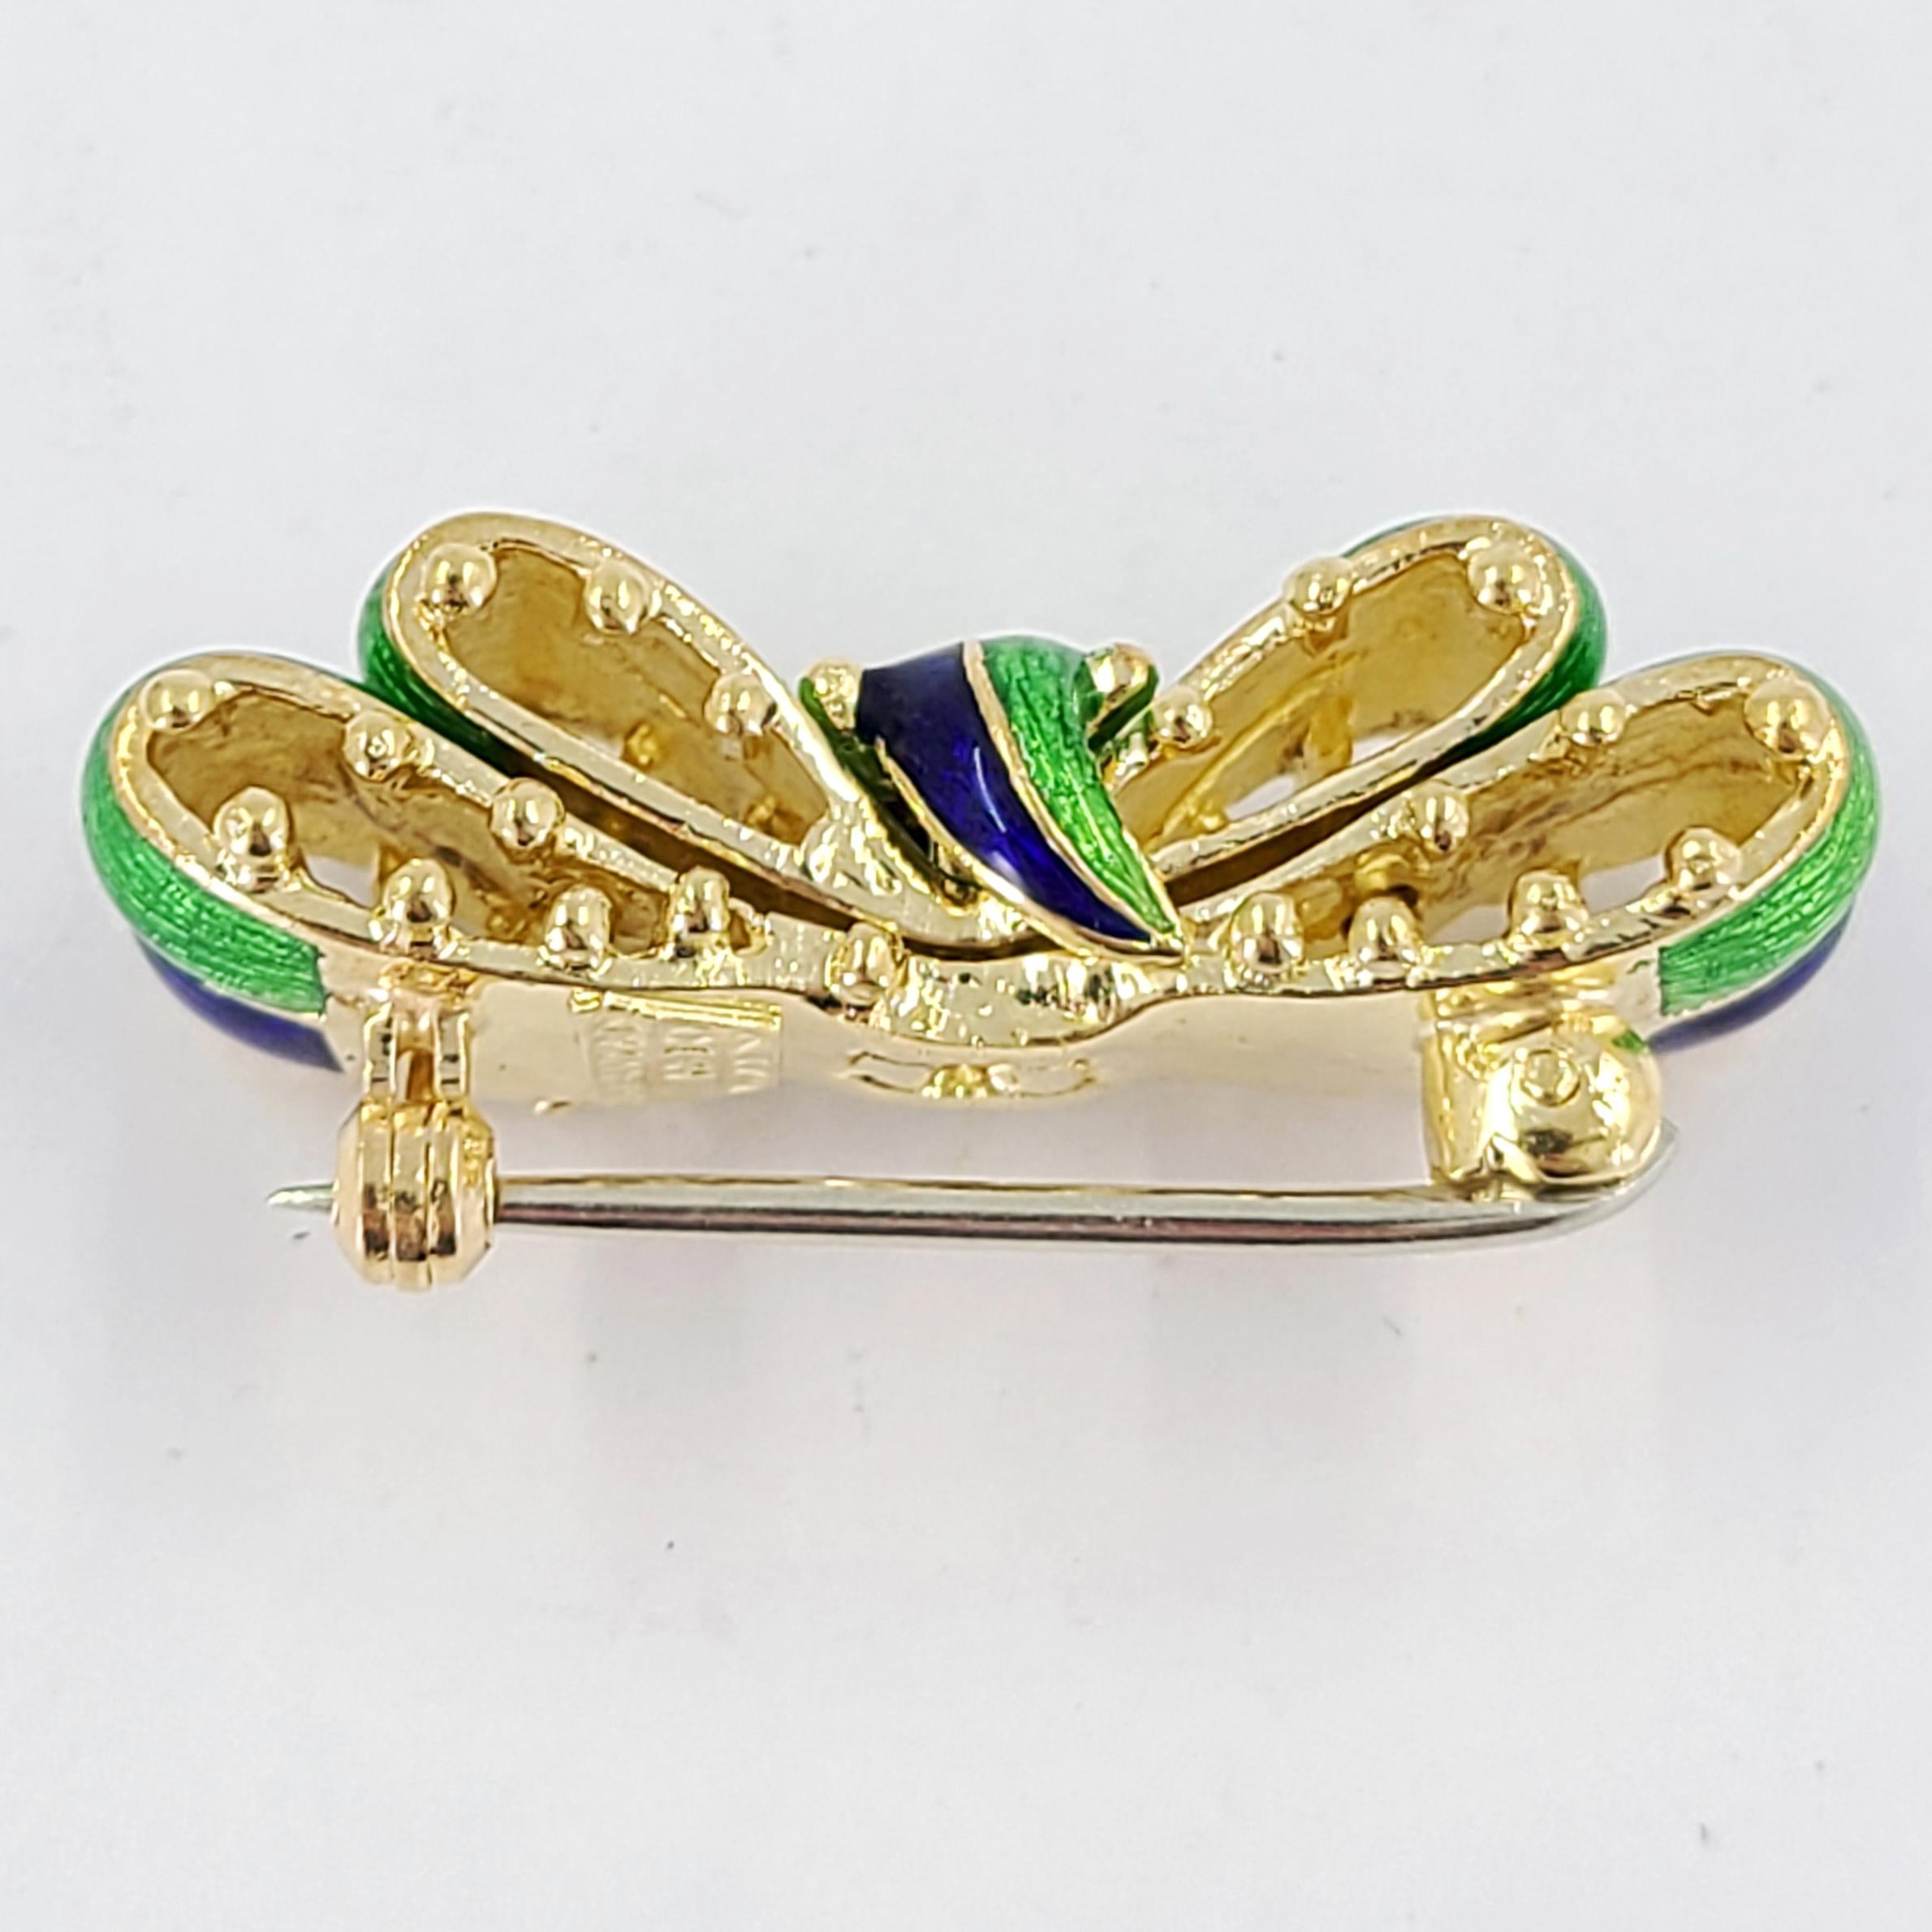 Rare Tiffany & Co. 18 Karat Yellow Gold & Multicolor Enamel Bow Brooch In Green & Blue With Rounded Bead Accents. 1.25 Inches Long. Finished Weight Is 12.8 Grams.